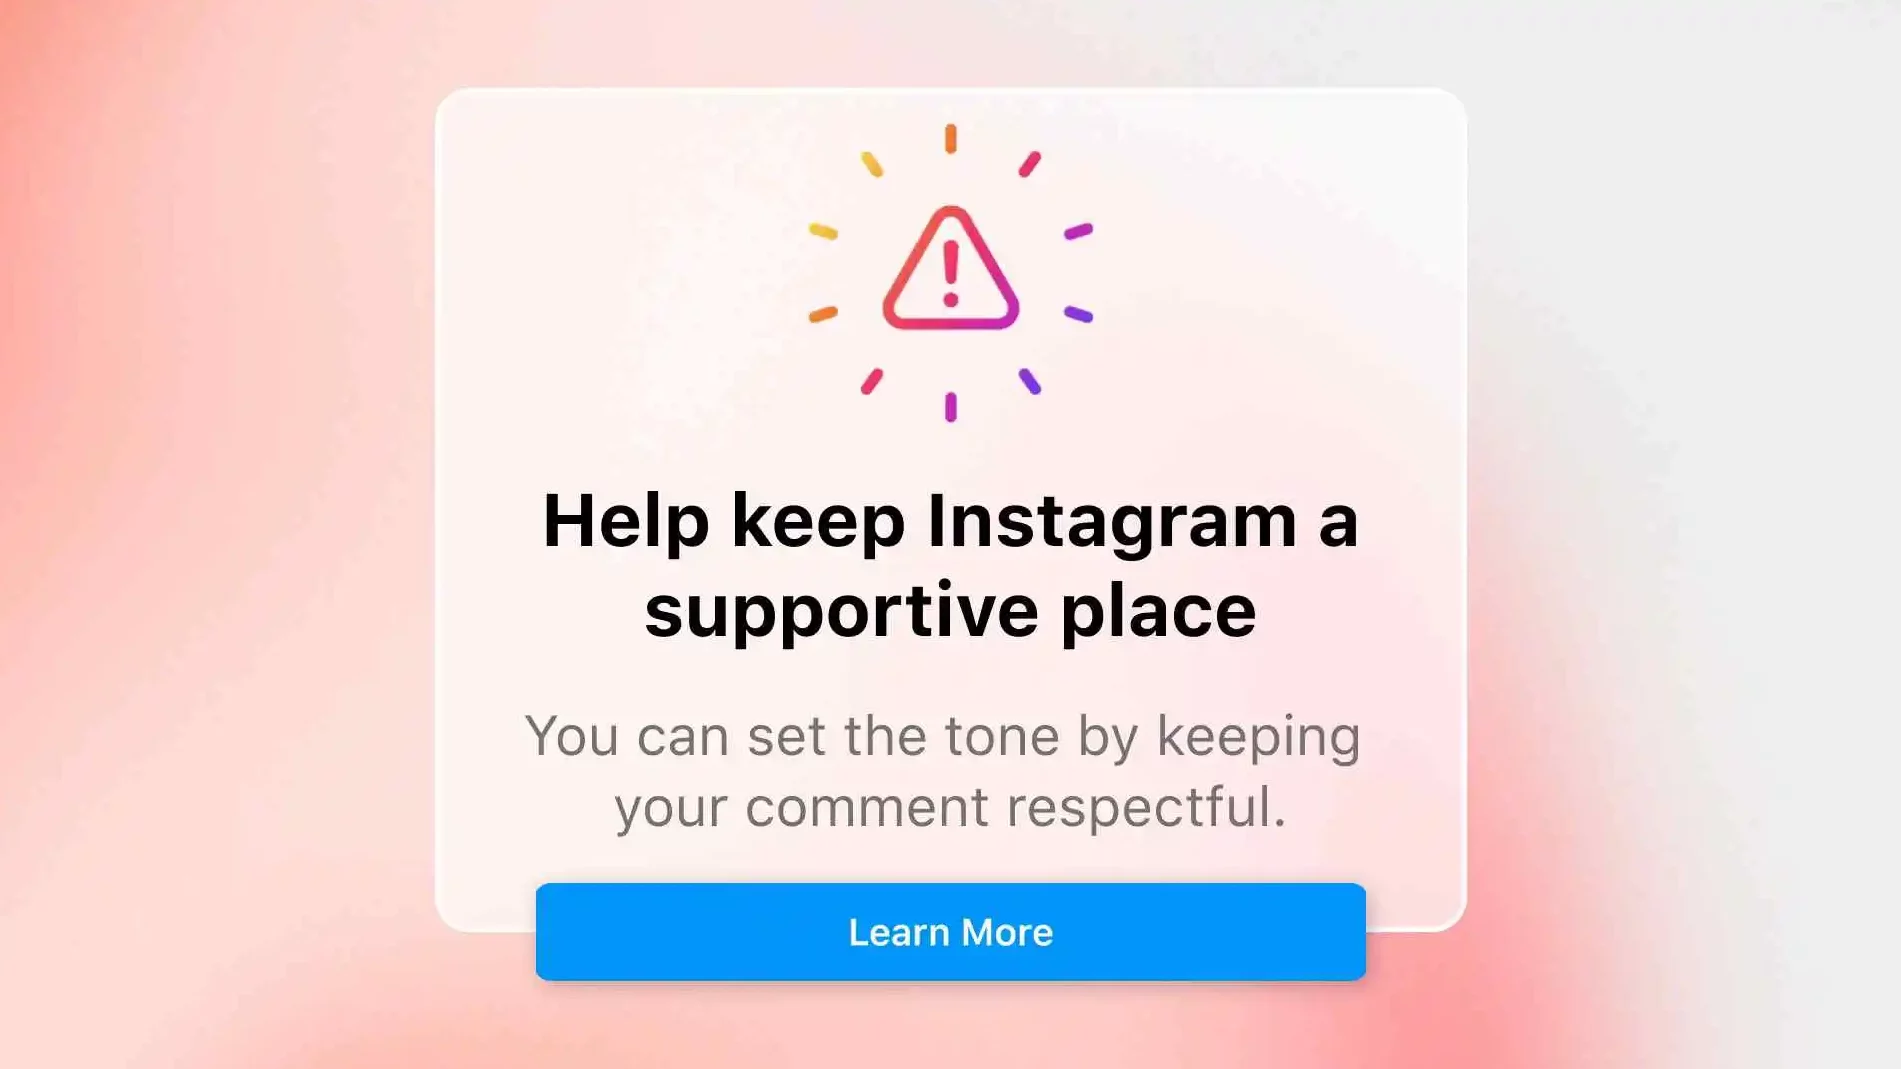 How To Know If Someone Reported You On Instagram | 2 Sneaky Ways!